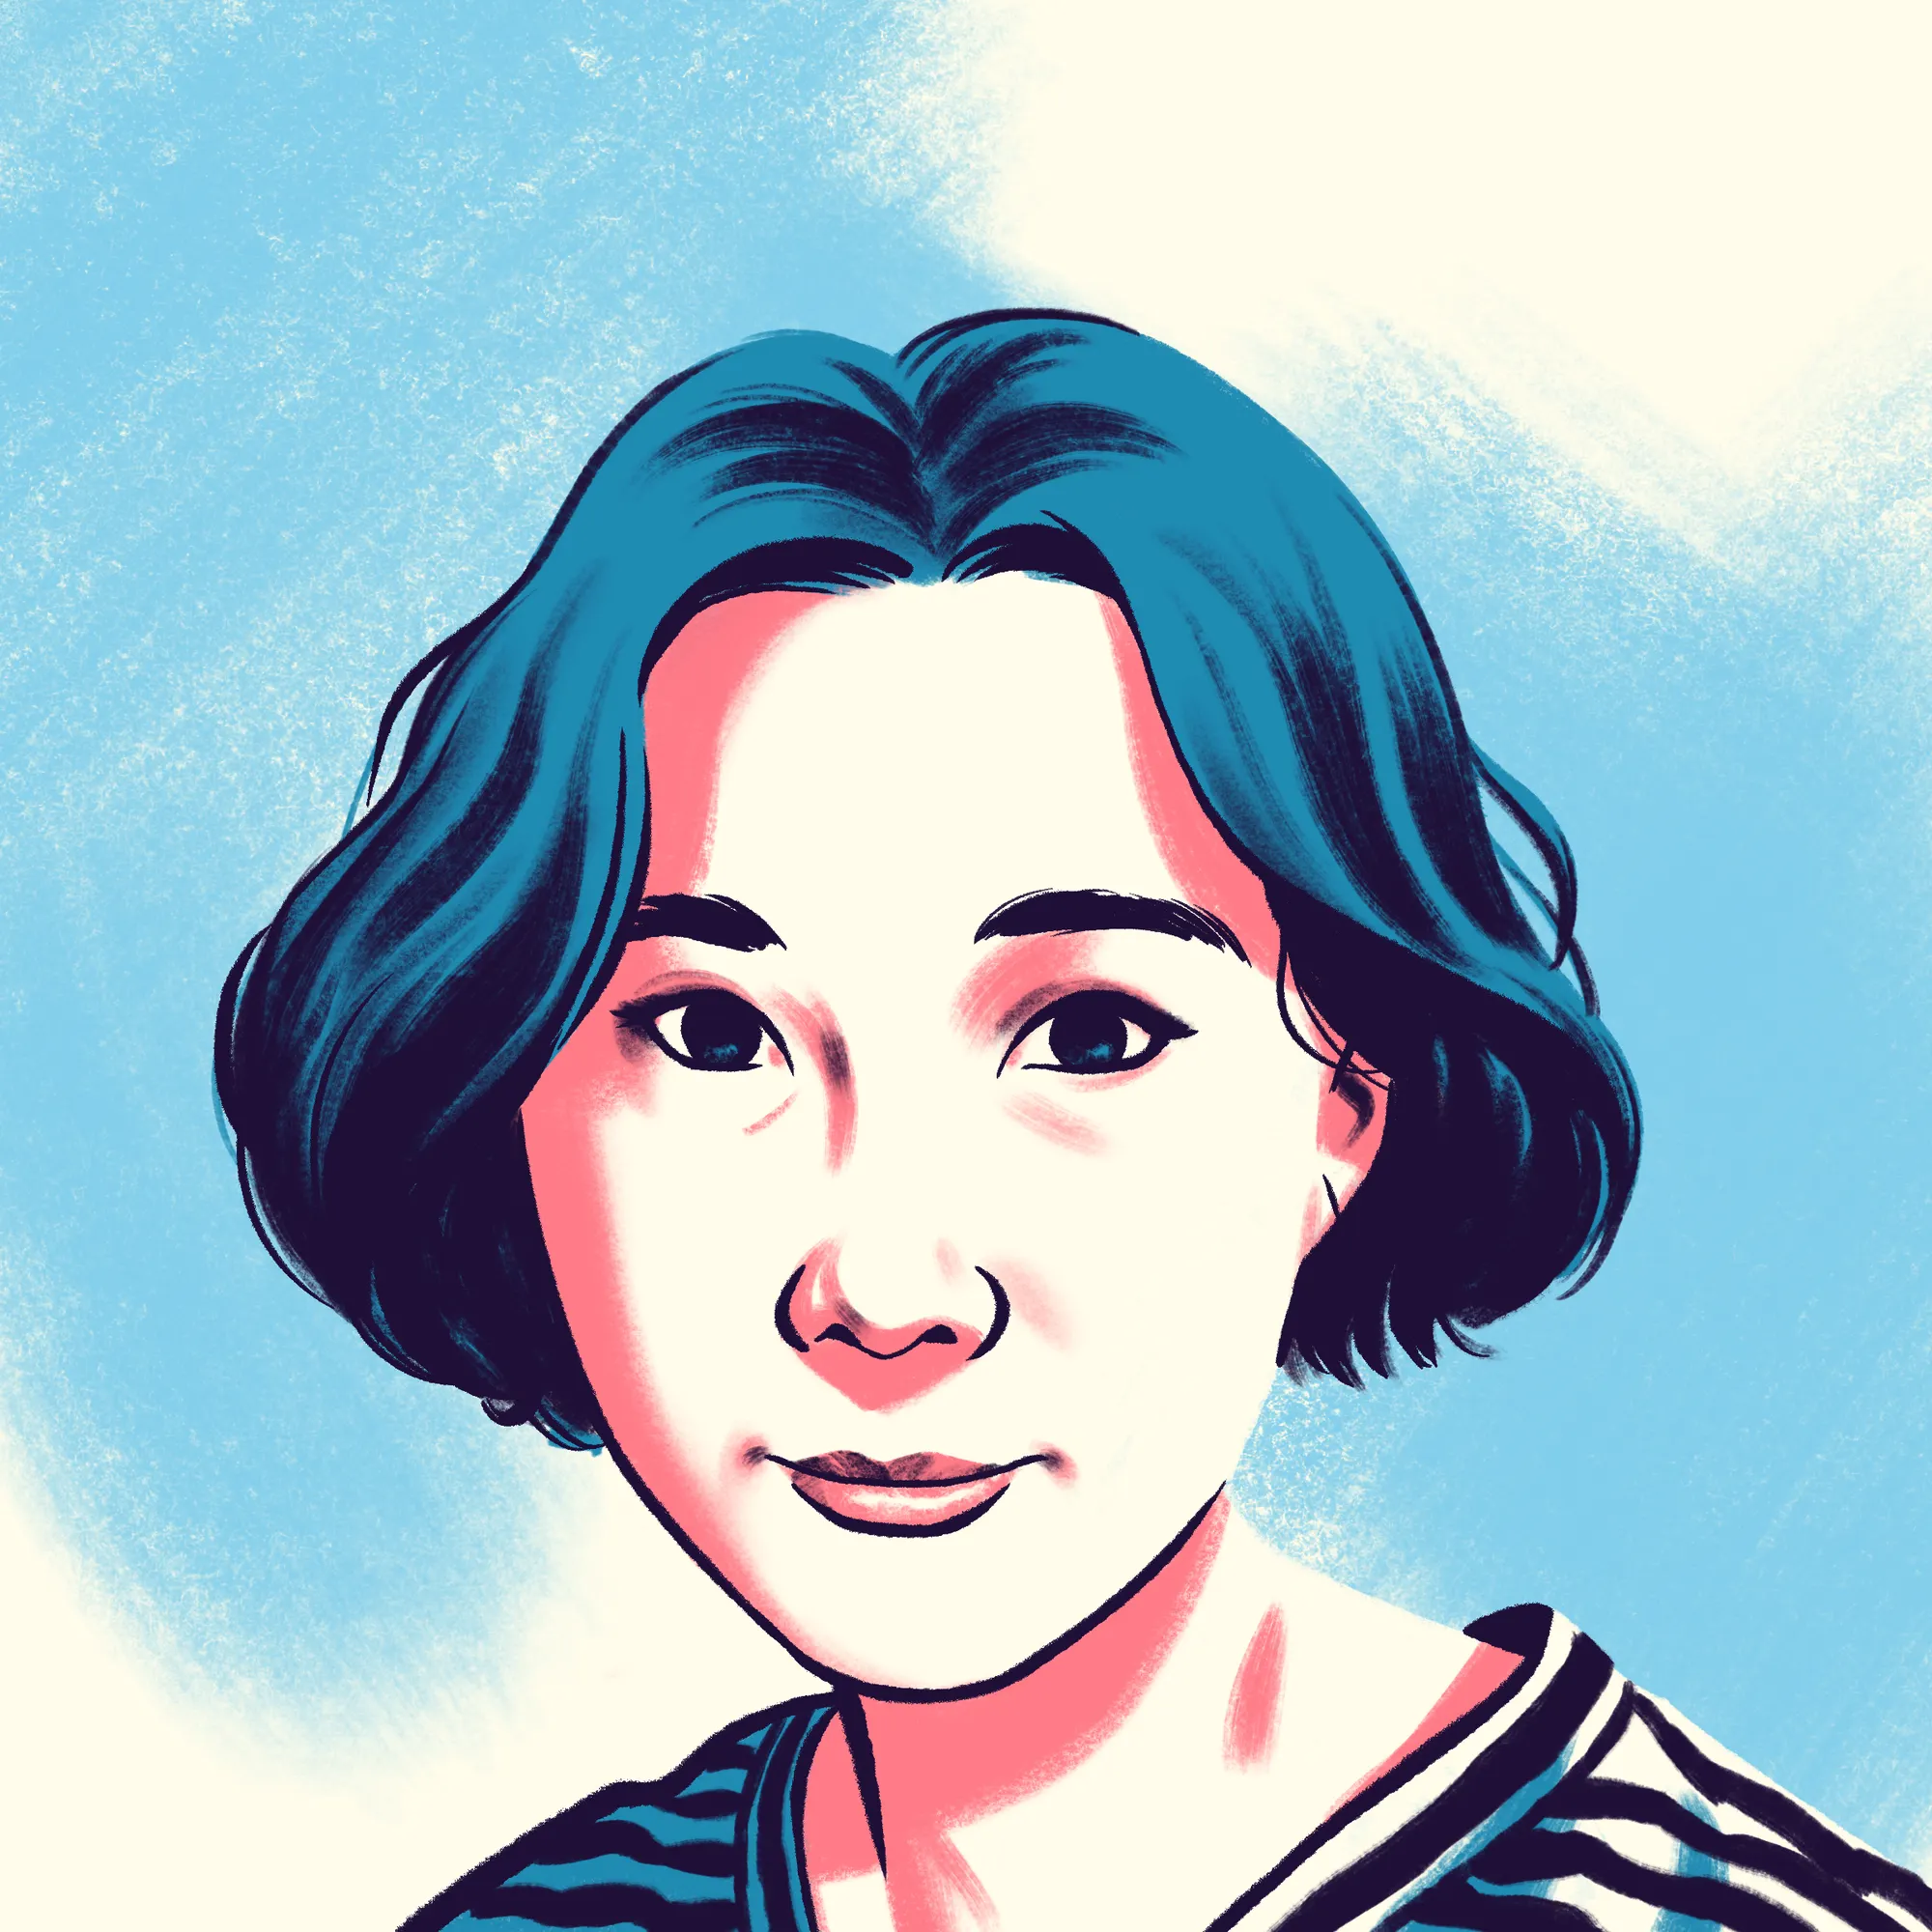 A cartoon-style illustration of a young Asian woman with a bob.